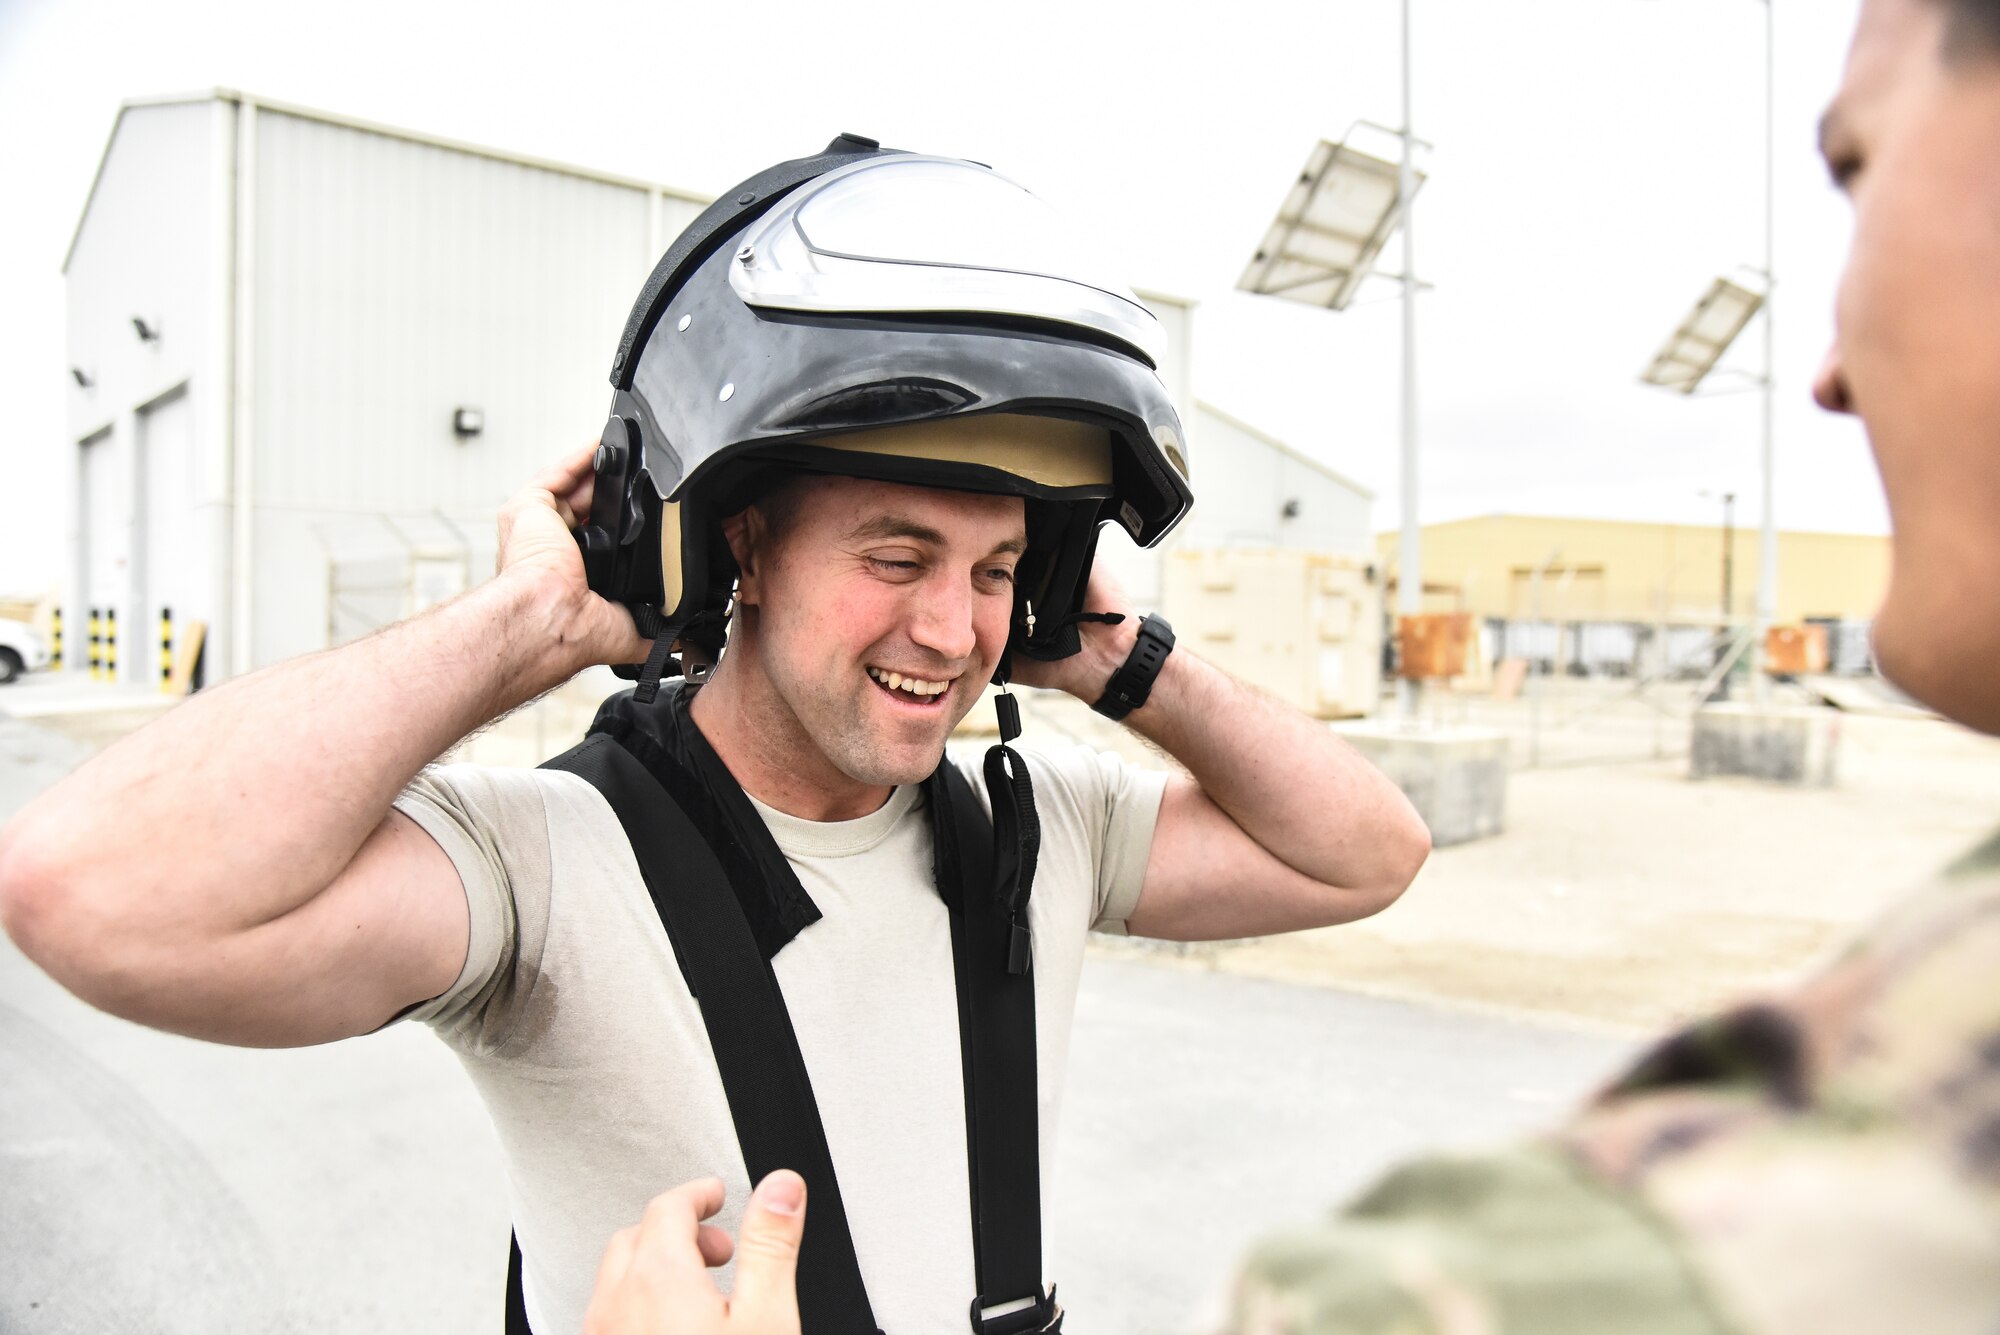 U.S. Air Force Staff Sgt. Mike Kealty, 380th Expeditionary Civil Engineer Squadron Explosive Ordnance Disposal flight EOD member, dons a bomb suit helmet during proficiency training at Al Dhafra Air Base, United Arab Emirates, Feb. 12, 2019. EOD Airmen serve as a member of base emergency response team and provide the ability to detect, monitor, evaluate, and decontaminate explosive, radioactive, chemical, or biological ordnance hazards. (U.S. Air Force photo by Senior Airman Mya M. Crosby)